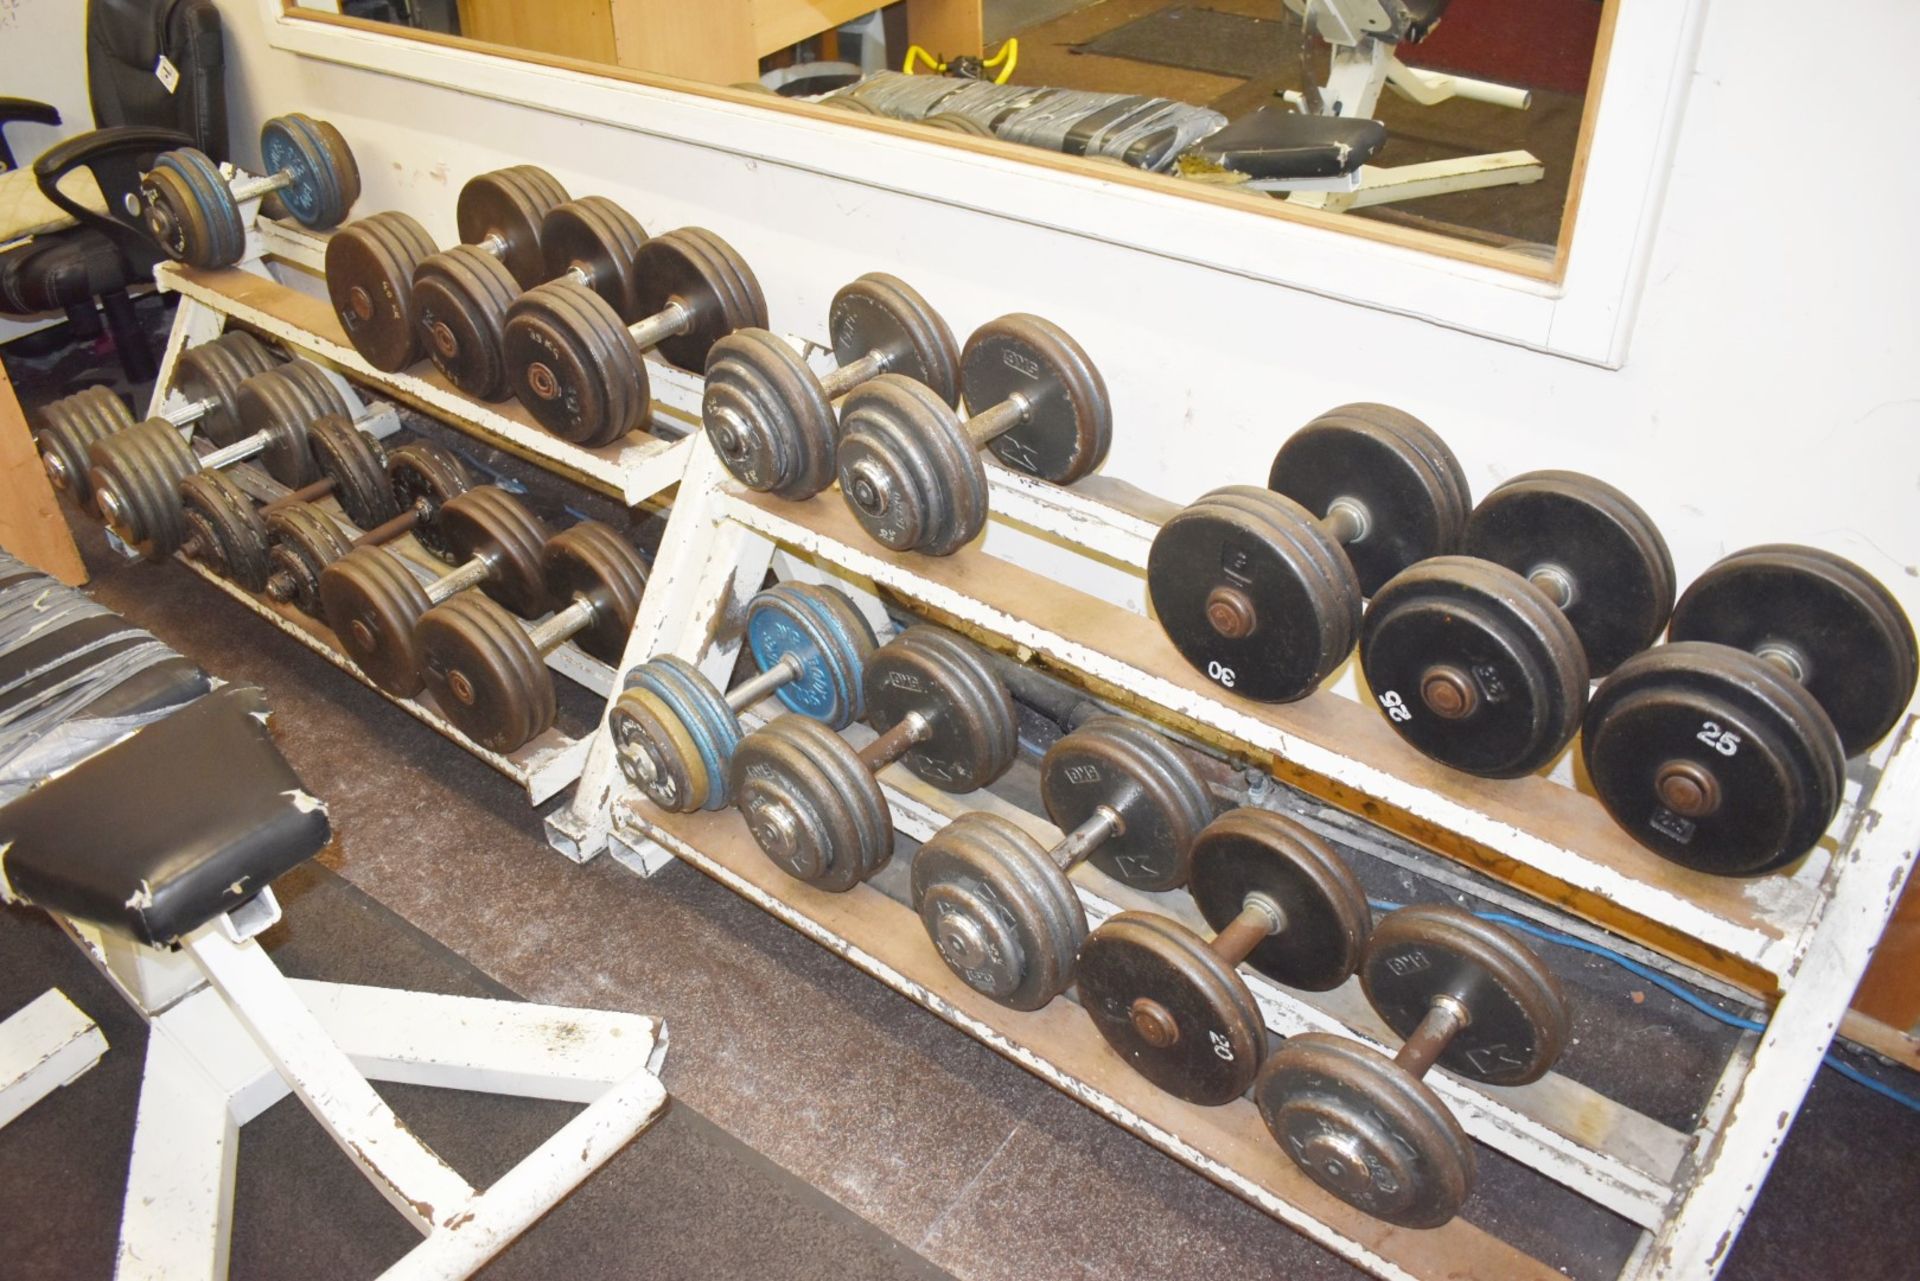 Approx 700 x Weight Lifting Weight Discs, 70 x Weight Lifting Bars, 32 x Weight Dumbells, 15 x